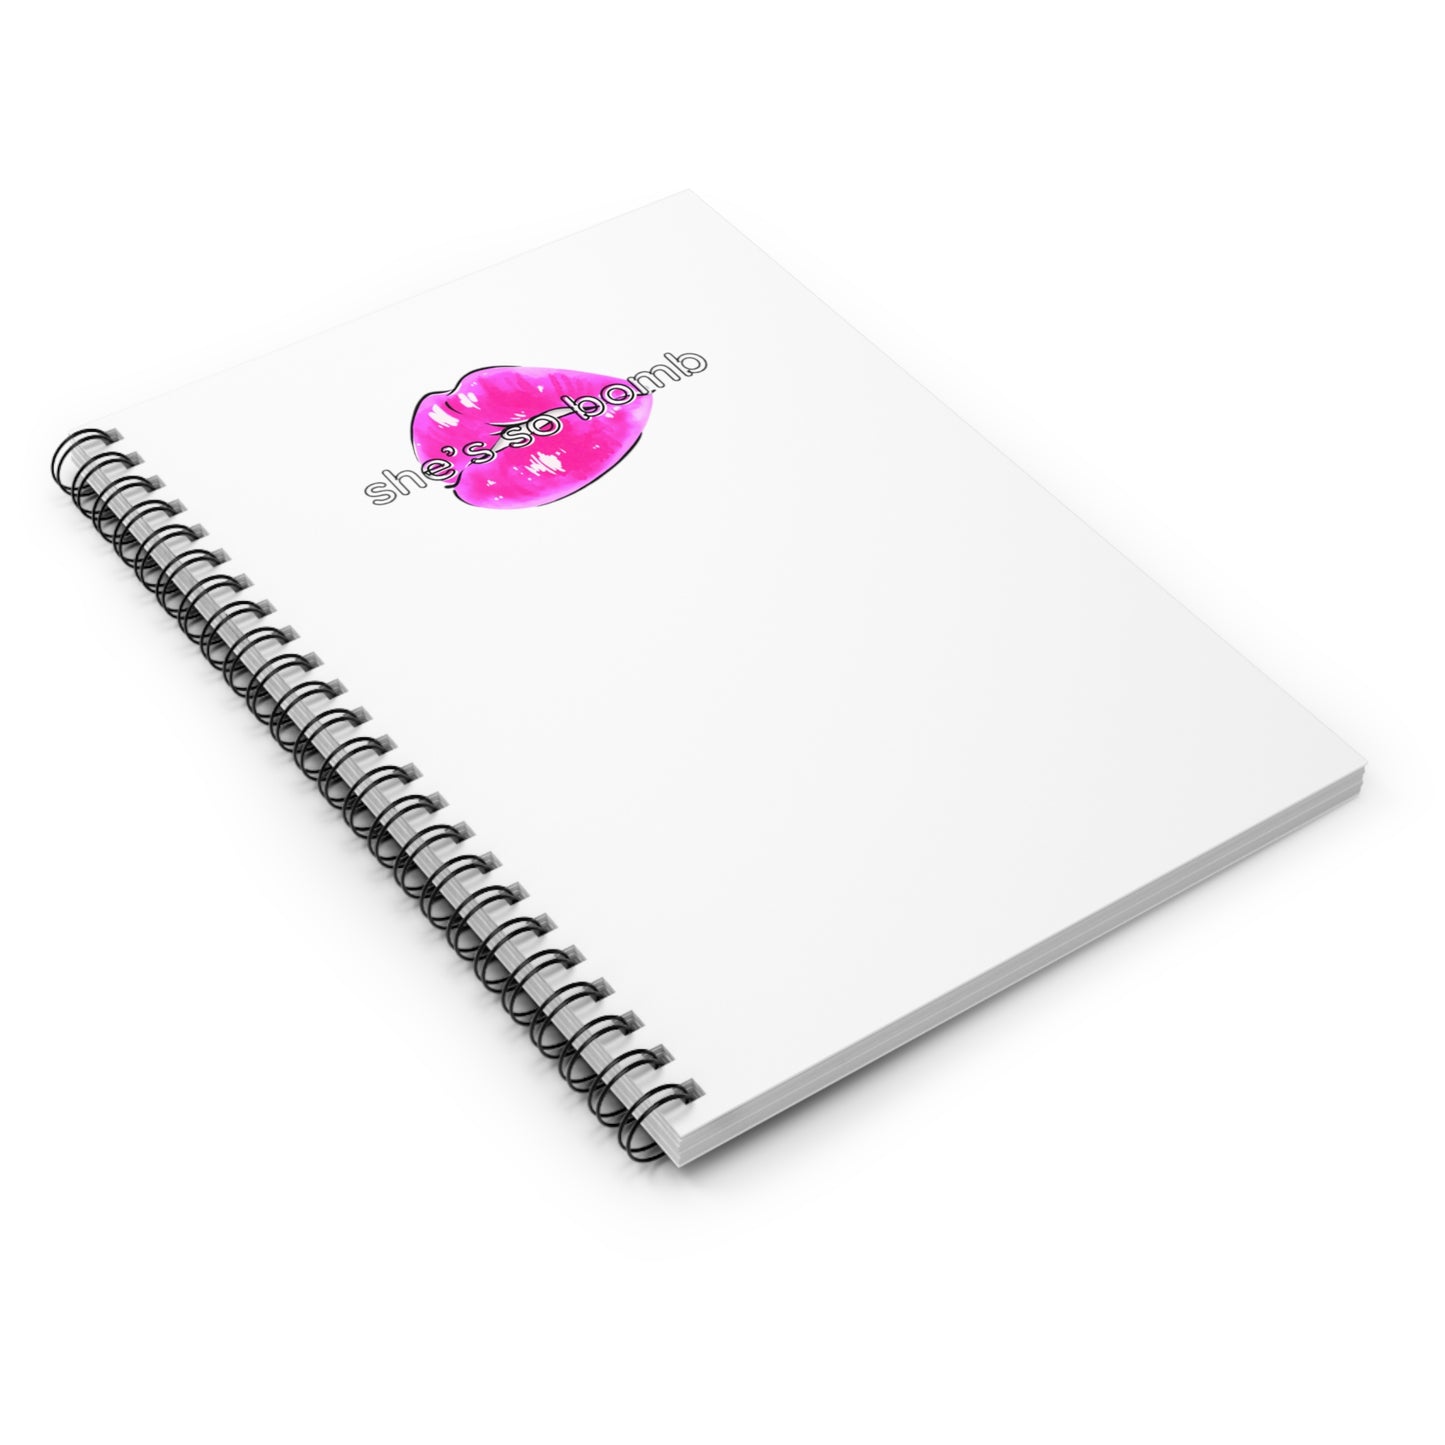 MAGENTA BOMB LIPS Spiral Notebook - Ruled Line